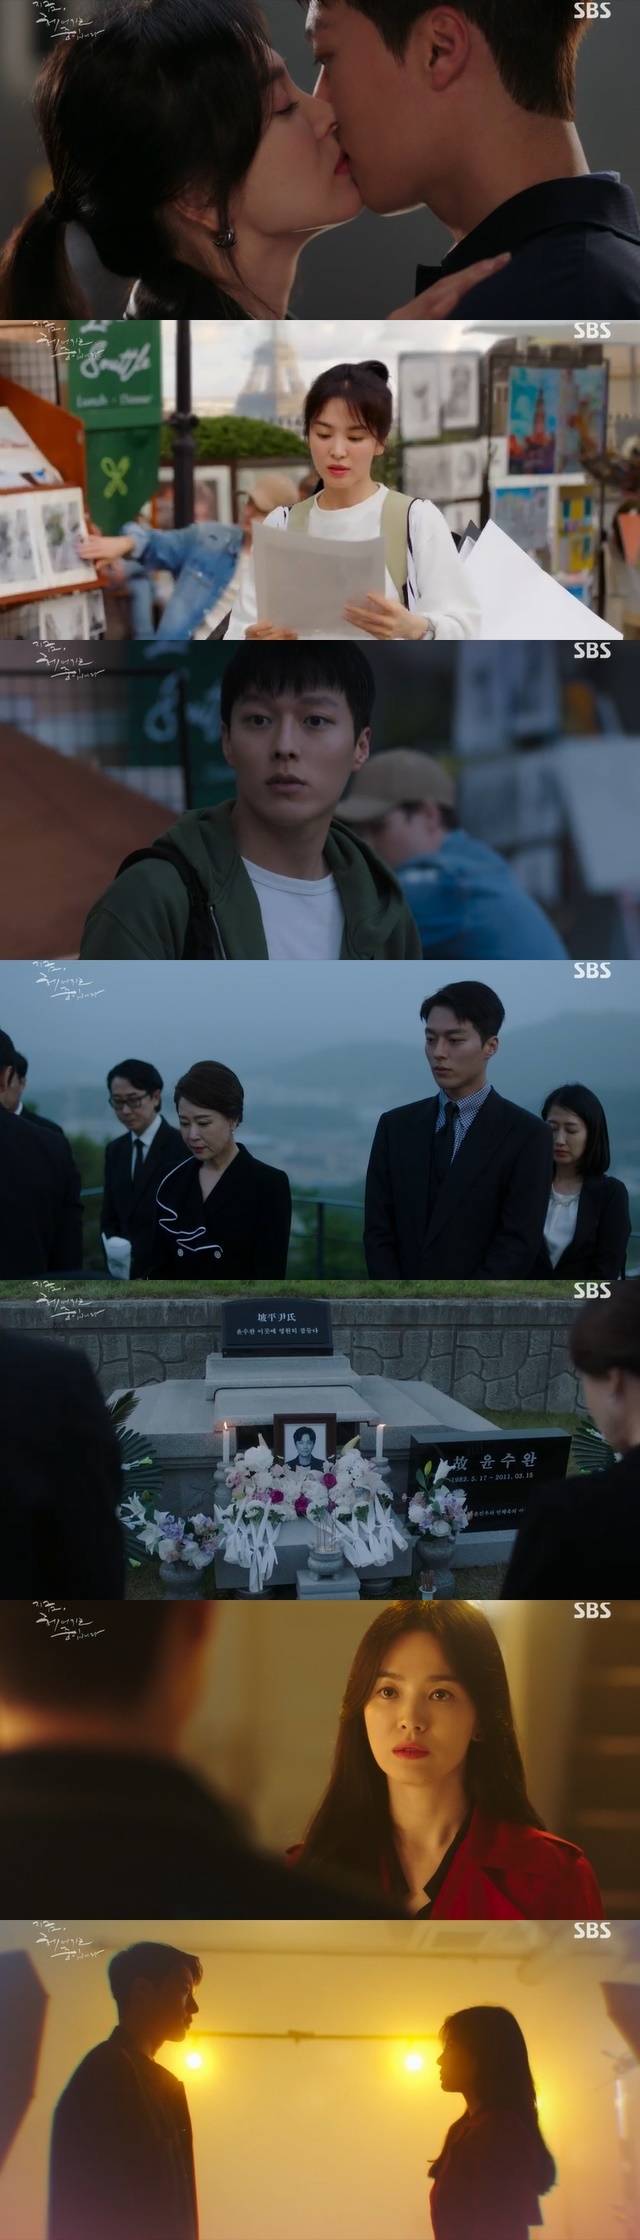 Song Hye-kyo was revealed to be the lover of Jang Ki-yongs dead brother, and a sad melody was made in earnest.In the second episode of SBSs Golden Earth Drama, Now, Im Breaking Up (playplayplayed by Jane the Virgin, directed by Lee Gil-bok), which was broadcast on November 13, it is like the fate of Hae Young (Song Hye-kyo), and Yoon Jae-guk (Jang Ki-yong), but on the other hand, a tragic relationship was drawn.On this day, Yoon Jae-guk actively contacted Ha Young-eun as soon as he returned to Seoul.Ha Young-eun ignored the contact of Yoon Jae-guk, but Yoon Jae-guk consistently showed his favorable feeling by meeting with his close brother Seok Do-hoon (Kim Joo-heon) and Ha Young-eun, who often held meetings for the 30th anniversary Celebration Celeb.Then, Yoon Jae-guk accidentally looked at the picture on the background of Ha Young-euns mobile phone and asked, Who is this picture? The exposure is messy, the composition is not good, and it is an amateur.The streetlights also blow up, he said, assessing his workability.Ha Yeong-eun responded, Its an obscure work.However, Ha Young said, So it seems to be looking at the eye, not the lens. I do not know about exposure and composition, but I just think about who is at the end of this road, how cold this rain was.Then its a professional. I was impressed by someone. The background of Ha Young-euns purchase of the photo was back to Paris 10 years ago.Ha Young-eun, who was studying at fashion school with the help of Hwang Dae-pyo (Ju Jin-mo), father of Friend Hwang Chi-sook (Choi Hee-seo), and was in a difficult life with Hwang Chi-sooks back-up, found a stall that collected and sold photos of unknown artists while running errands for Hwang Chi-sook.Ha Young-eun was caught as soon as he saw the photo, and eventually he bought the photo with the money in the water.I am afraid that I will go back to that time, I will be dark, said Ha Young-eun, who is now, to Yoon Jae-guk. It took a long time to get rid of the hard flesh, but it is a moment to get rid of it.After that, Ha Young broke up with Yoon Jae-guk and sent a picture of himself to Yoon Jae-guk, saying, I like this picture, but please share it.Yoon Jae-kook, who was working as an amateur photographer at the time, also sold his own photo works through Friend.Ha Young-euns photo was taken by Yoon Jae-kook at the time. Yoon Jae-kook heard from Friend that the photo was sold for 20 euros and said, You bought this? Who?Hae Young looked at the way that had passed a long time ago and added to the affection of the mixed relationship.Yoon Jae-guk went straight to Ha Young-eun again, and Yoon Jae-guk asked him to be honest only once, saying that he would return to Paris tomorrow.Then Ha Young kissed Yoon Jae-guk lightly and expressed his favor, but he said that he was a bosss opponent. Why is Yoon Jae-guk?The answer I can do is this far. The two seemed to break up, but another unexpected relationship was revealed at the end of the broadcast.Yoon Jae-guk secretly asked his acquaintance Shin Yoo-jung (Yoon Jung-hee) to attend the event for Ha Young-eun, who is worried about the whole thing.After that, Shin Yoo-jung, who faced Ha Young-eun at the event site, called Yoon Jae-guk, who is going to the airport by stopping at the tomb of his brother Yoon Soo-wan (Shin Dong-wook), and said, Do you not know who Ha Young-eun is?, and it caused tension.Yoon did not leave the country after all. Instead, Yoon returned to the photographer of Sono. Then, Yoon Jae-guk said, Do you know Yoon Soo-wan?I took out my brothers name, and Ha Young replied, I know. Im breaking up with him. Ha Young-eun said, I forgot. I thought I forgot.My youth, which was once hot. But the name that ended. The name that should be released, but that I could not.So, the narration indirectly revealed that Ha Young-eun was in love with Yoon Jae-kooks brother Yoon Soo-wan.